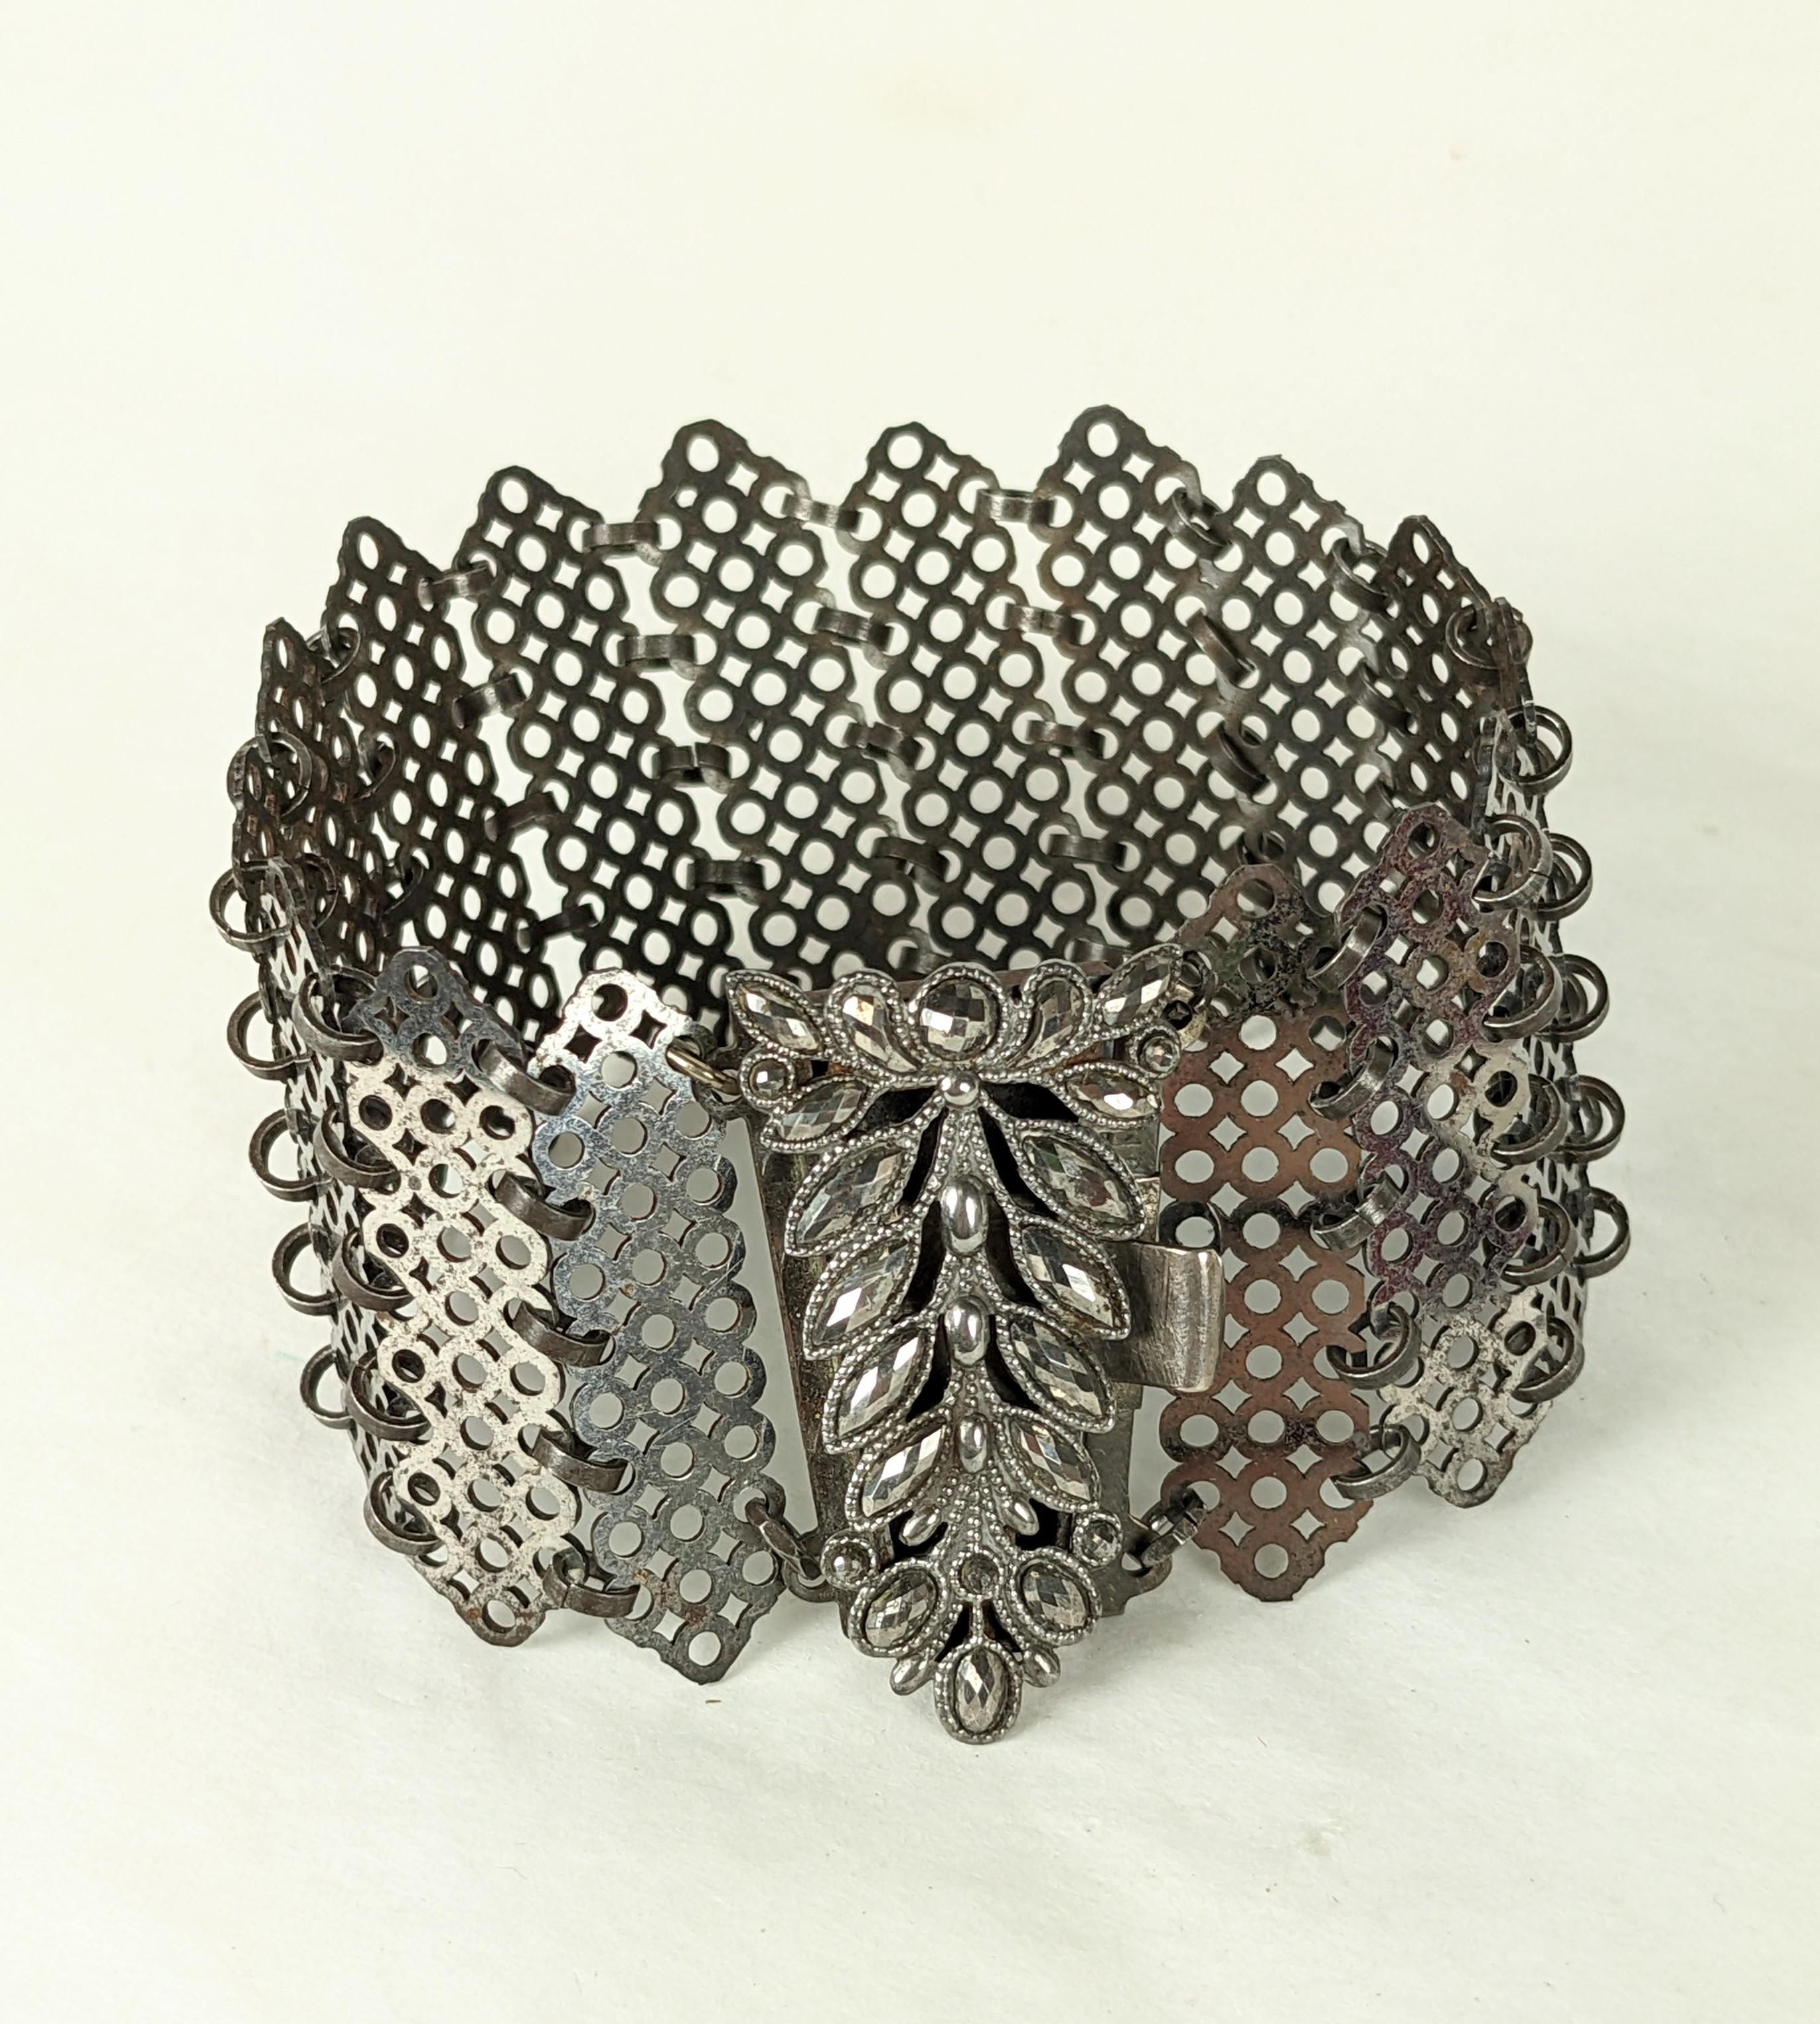 Attractive and Unusual Victorian French Cut Steel Bracelet from the mid 19th Century. Flexible links of pierced steel with cut steel marquise decorated clasp. 1840's France. 7.5